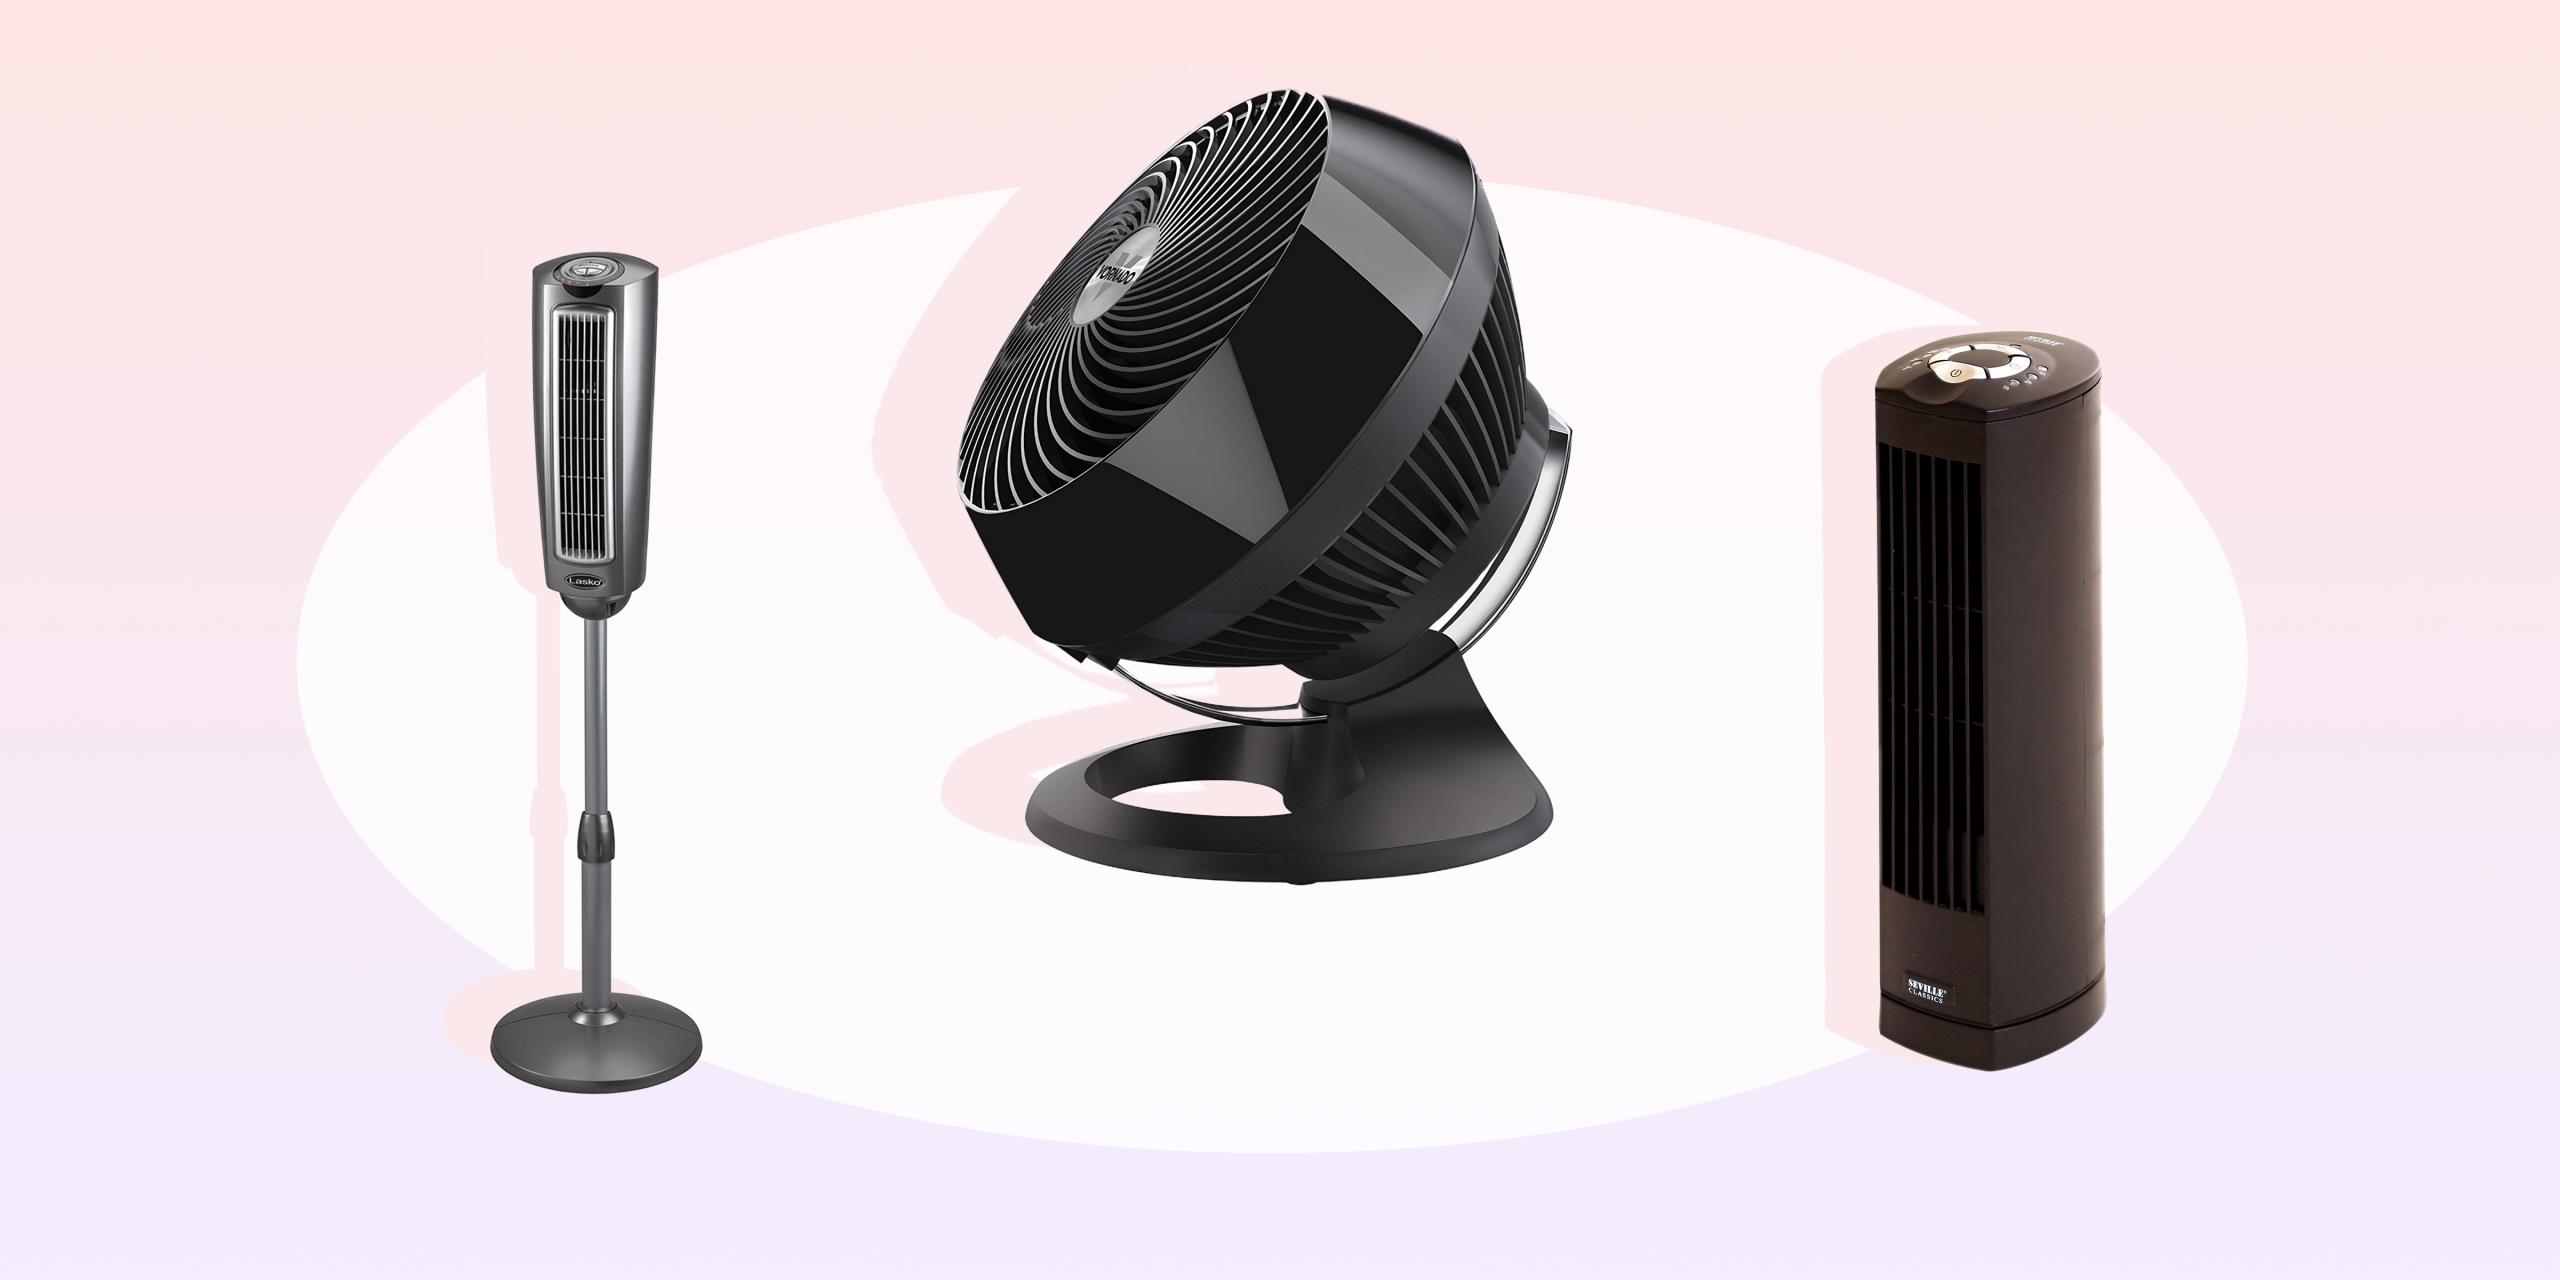 Fans That Cool Like Air Conditioners intended for dimensions 4800 X 2400